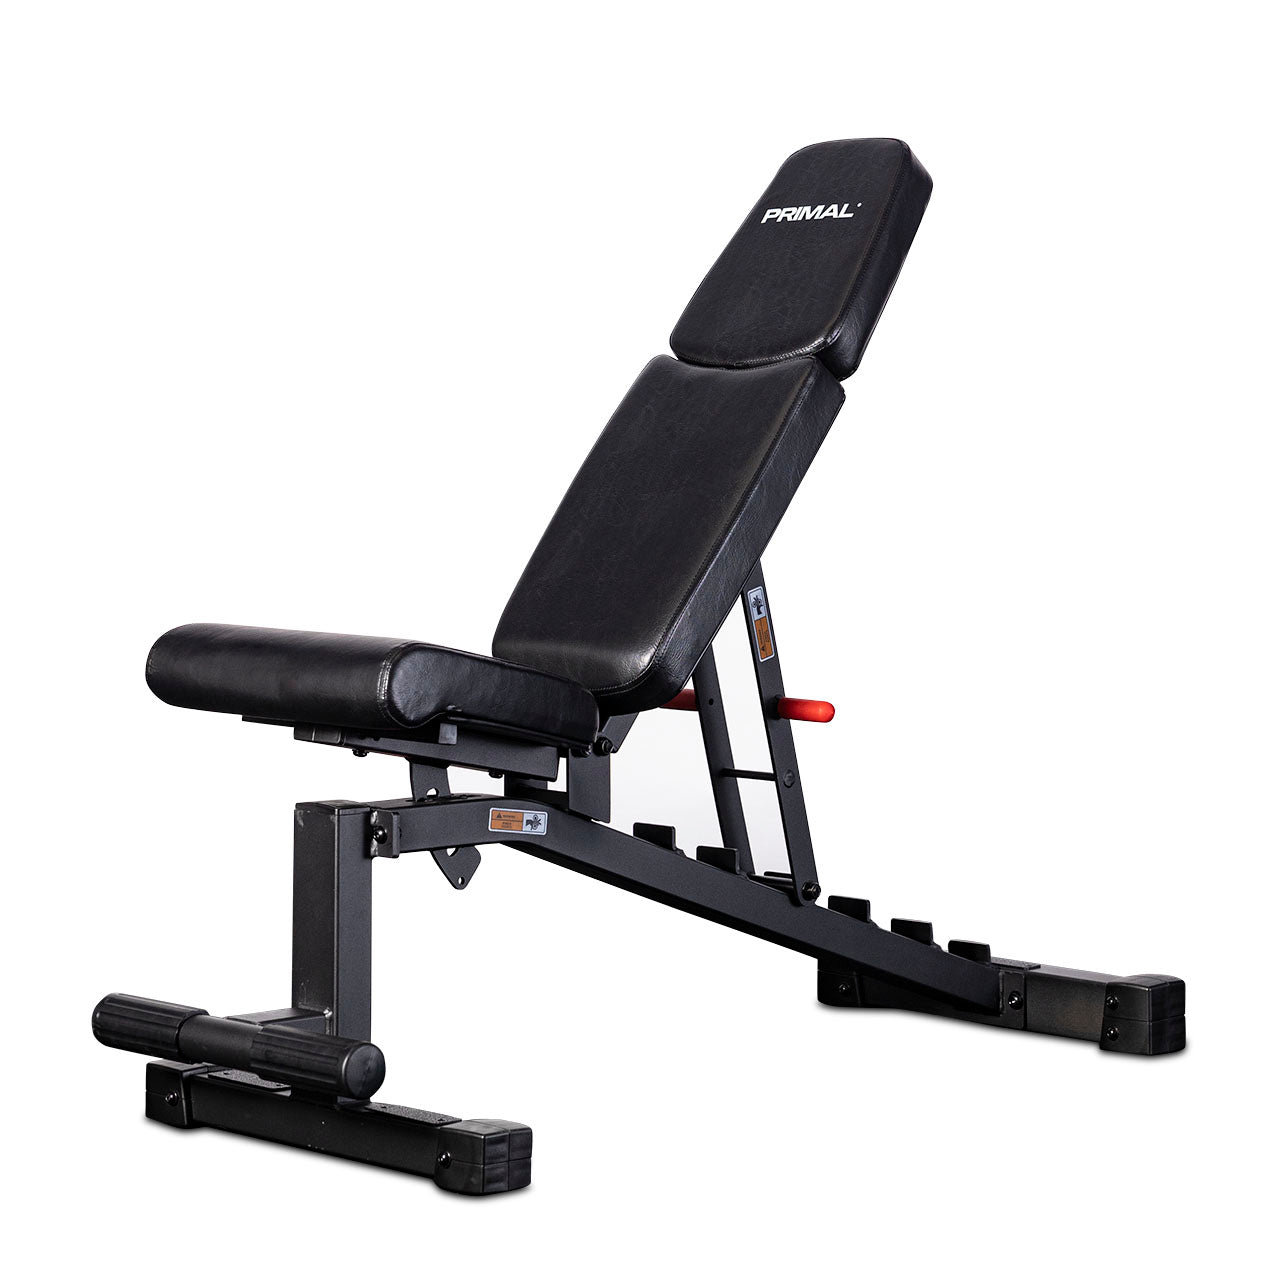 Primal Personal Series Utility Bench